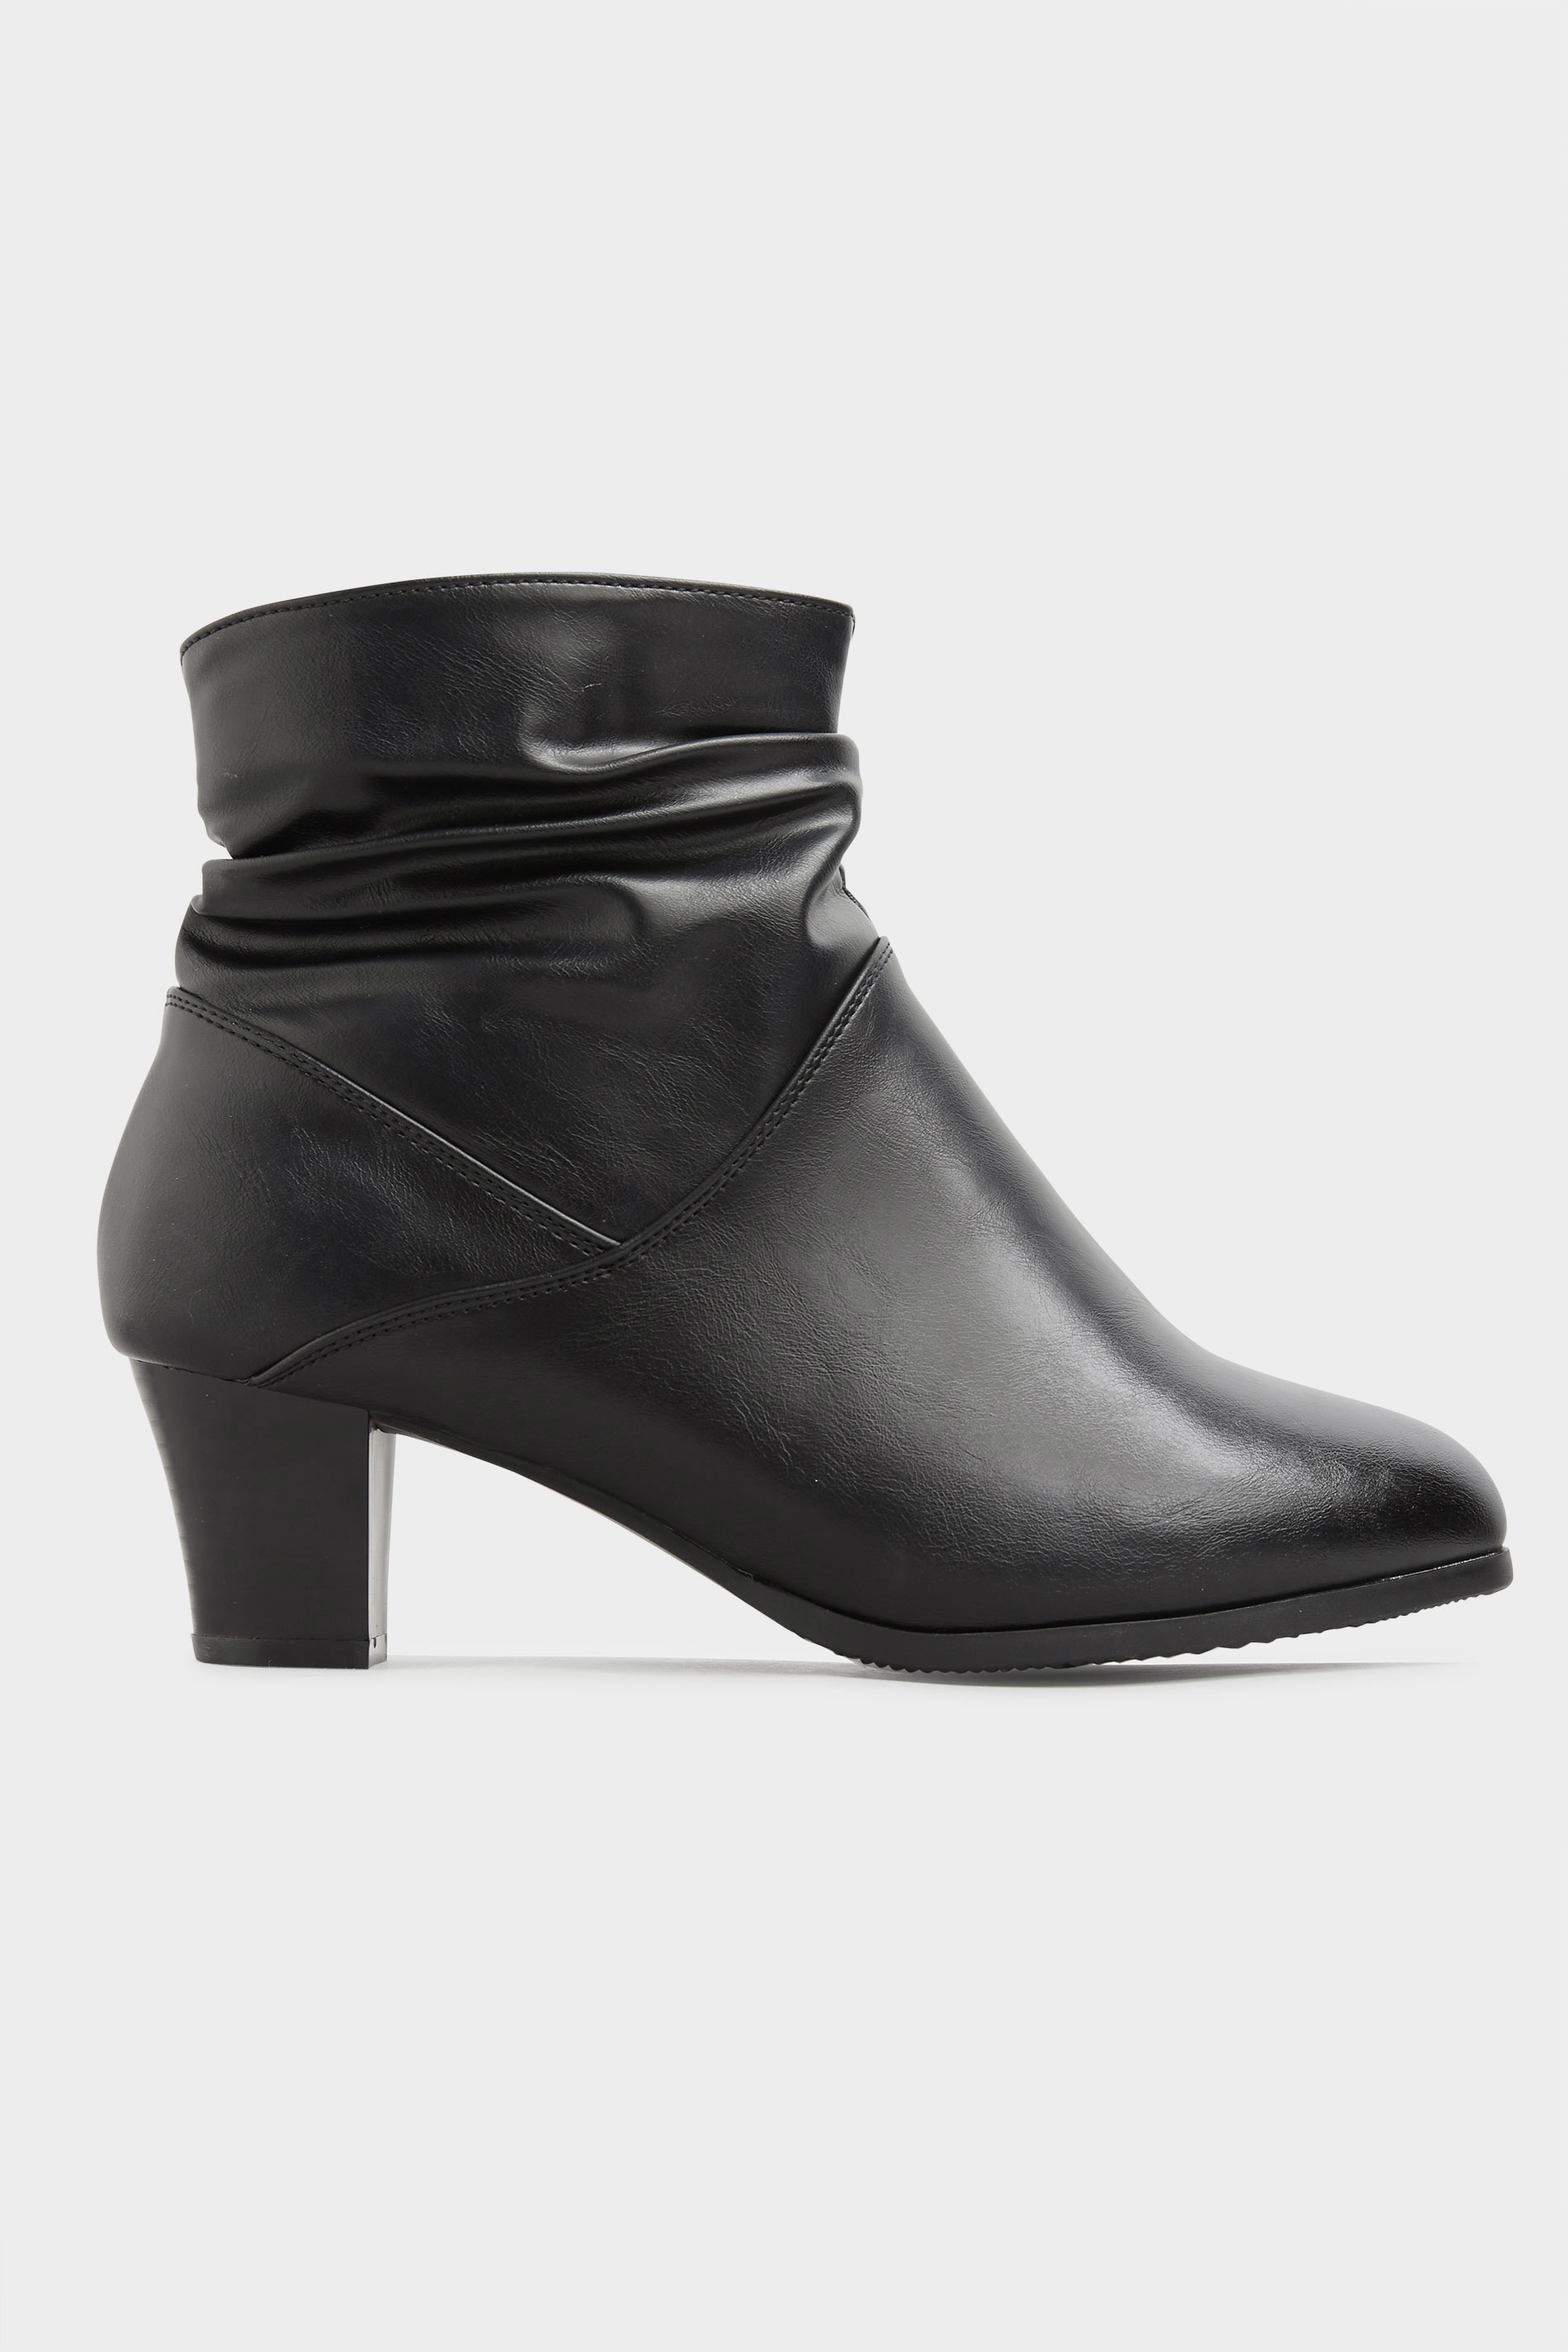 Black Faux Leather Ruched Heeled Ankle Boots In Extra Wide Fit | Long ...